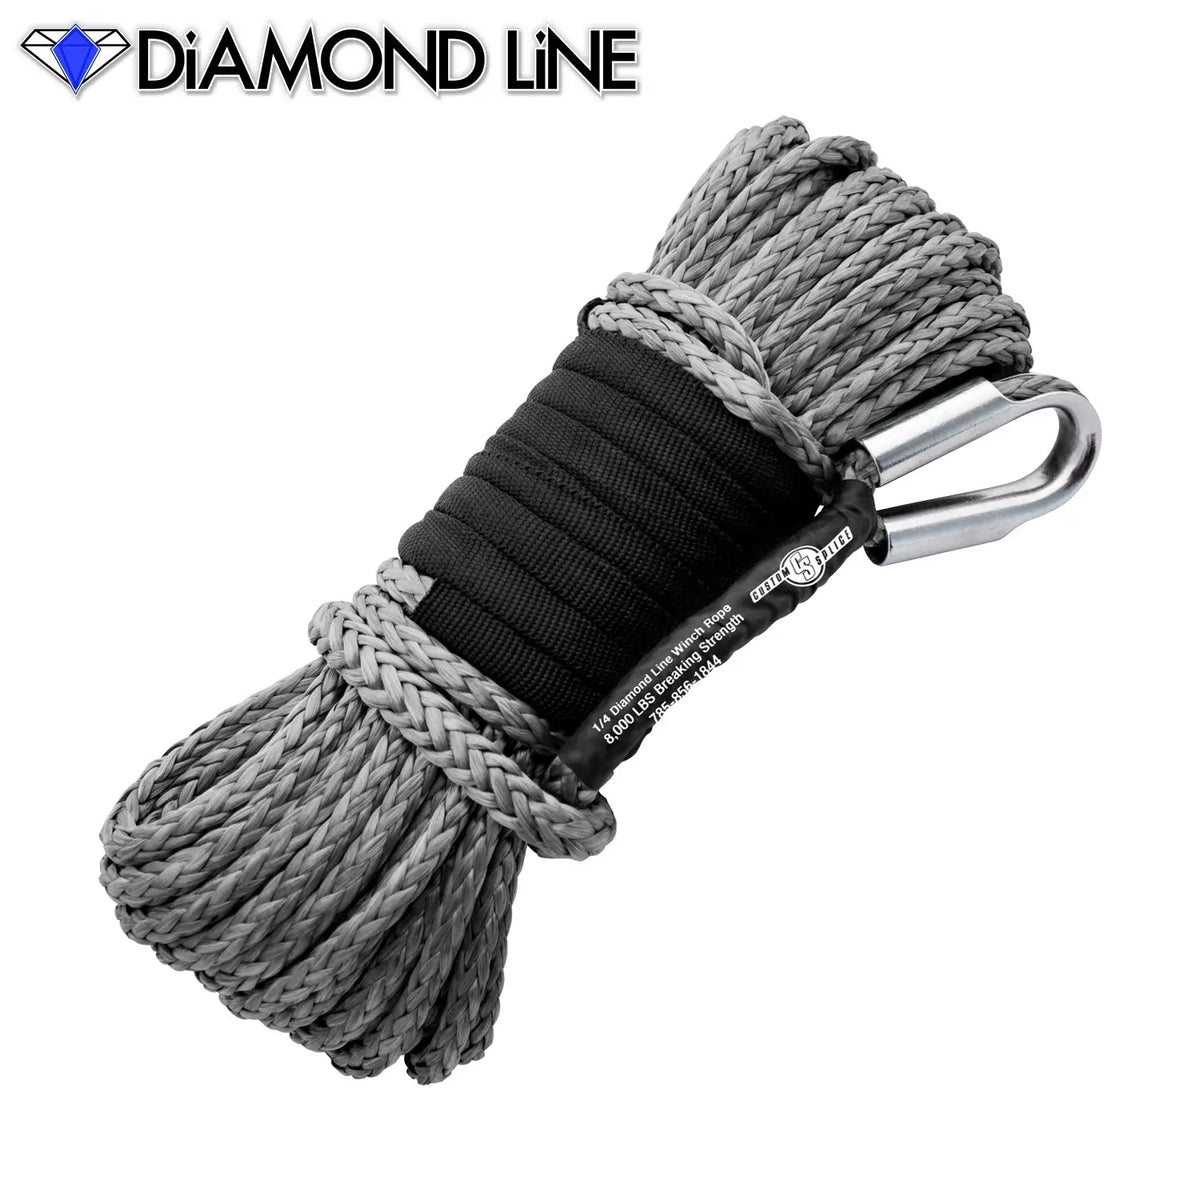 1/4 Synthetic Winch Rope - 9,000 lb. Breaking Strength